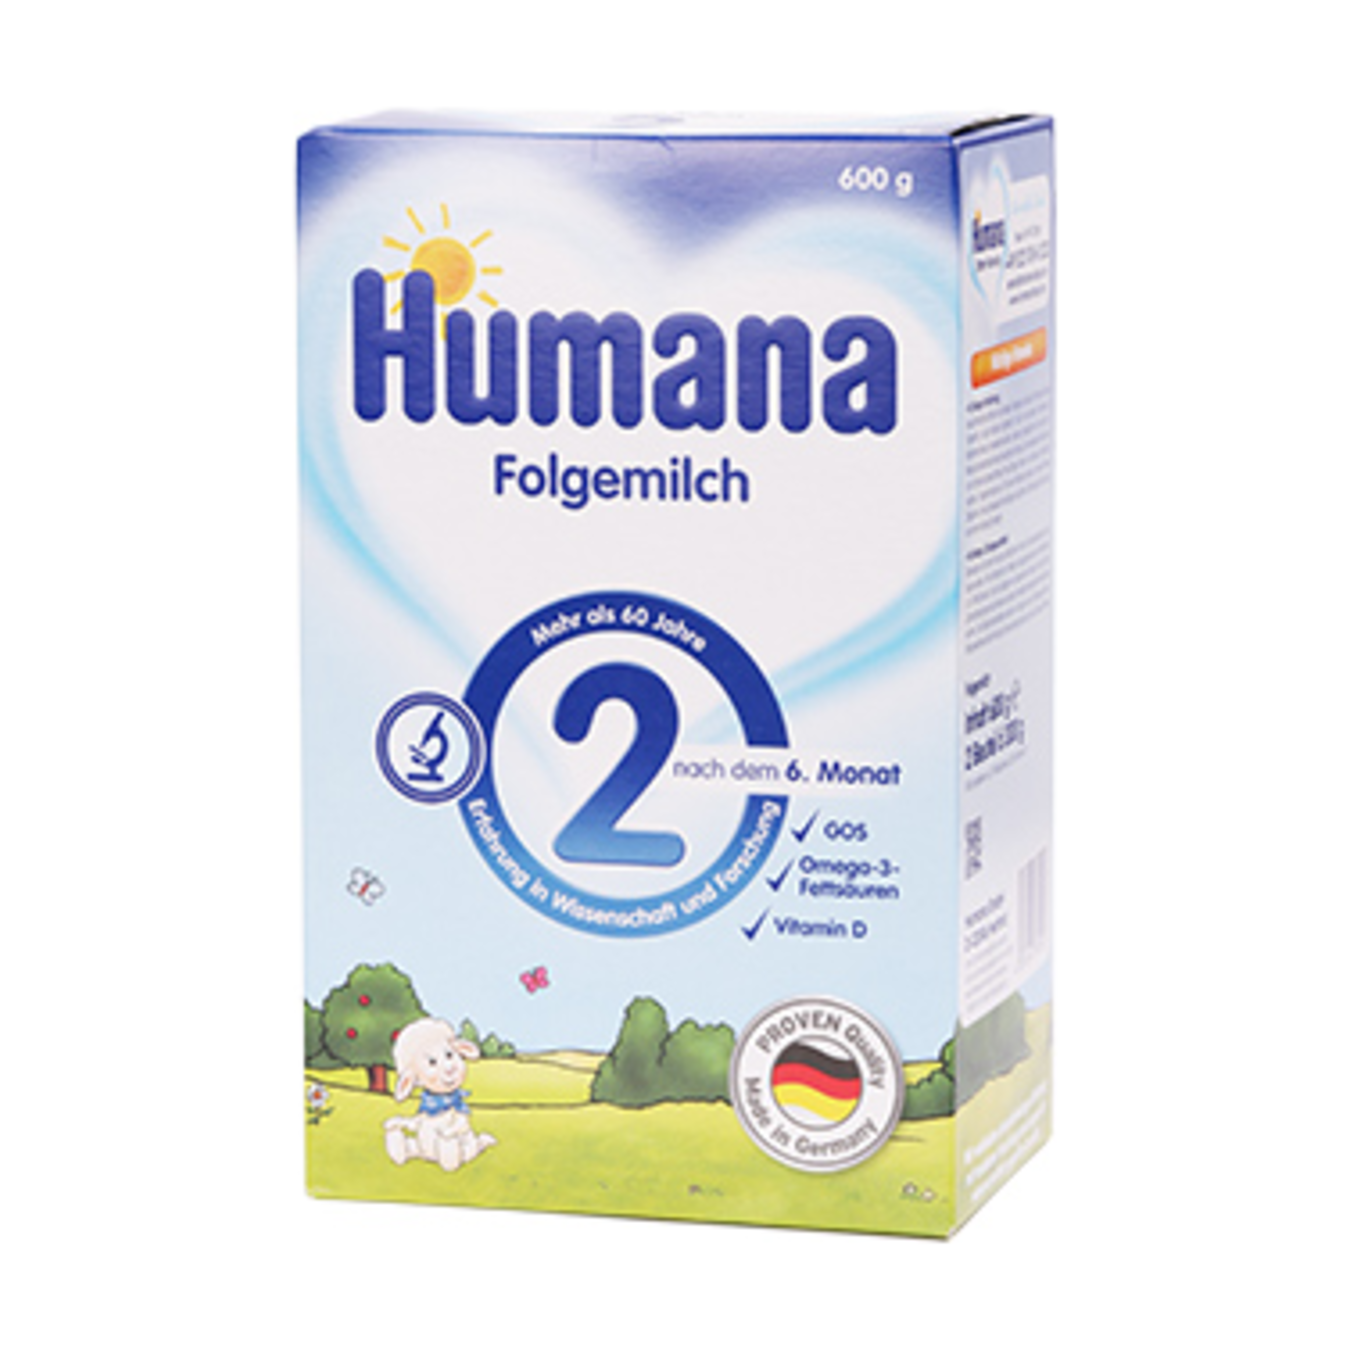 Humana for children from 0 to 6 months dry milk mix 600g